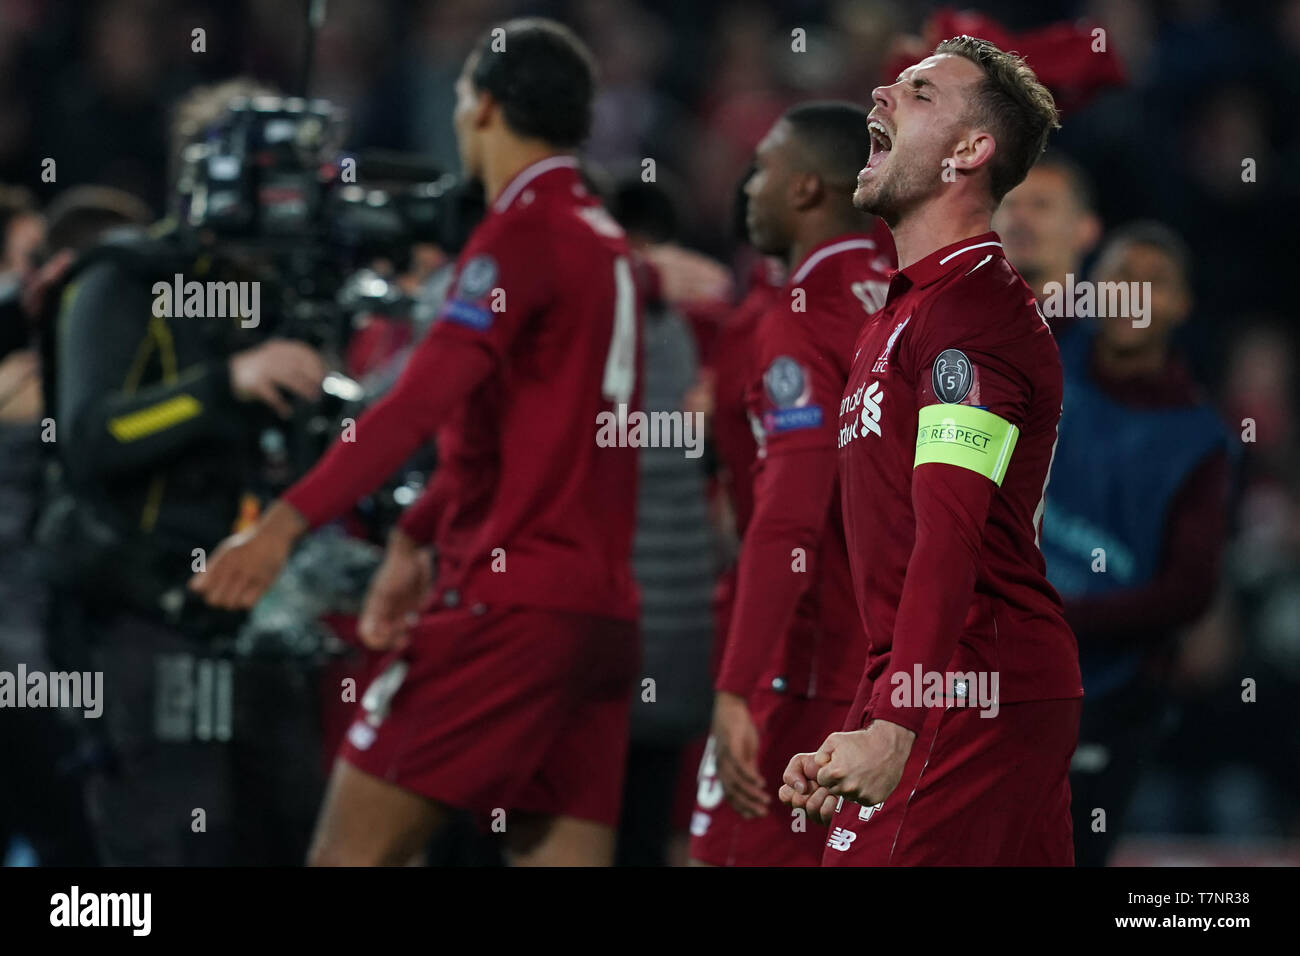 Liverpool's Jordan Henderson (C) celebrates at the end of the match  7th Mayl 2019 , Anfield Stadium, Liverpool, England;  UEFA Champions League Semi Final, Second Leg, Liverpool FC vs FC Barcelona   Credit: Terry Donnelly/News Images Stock Photo